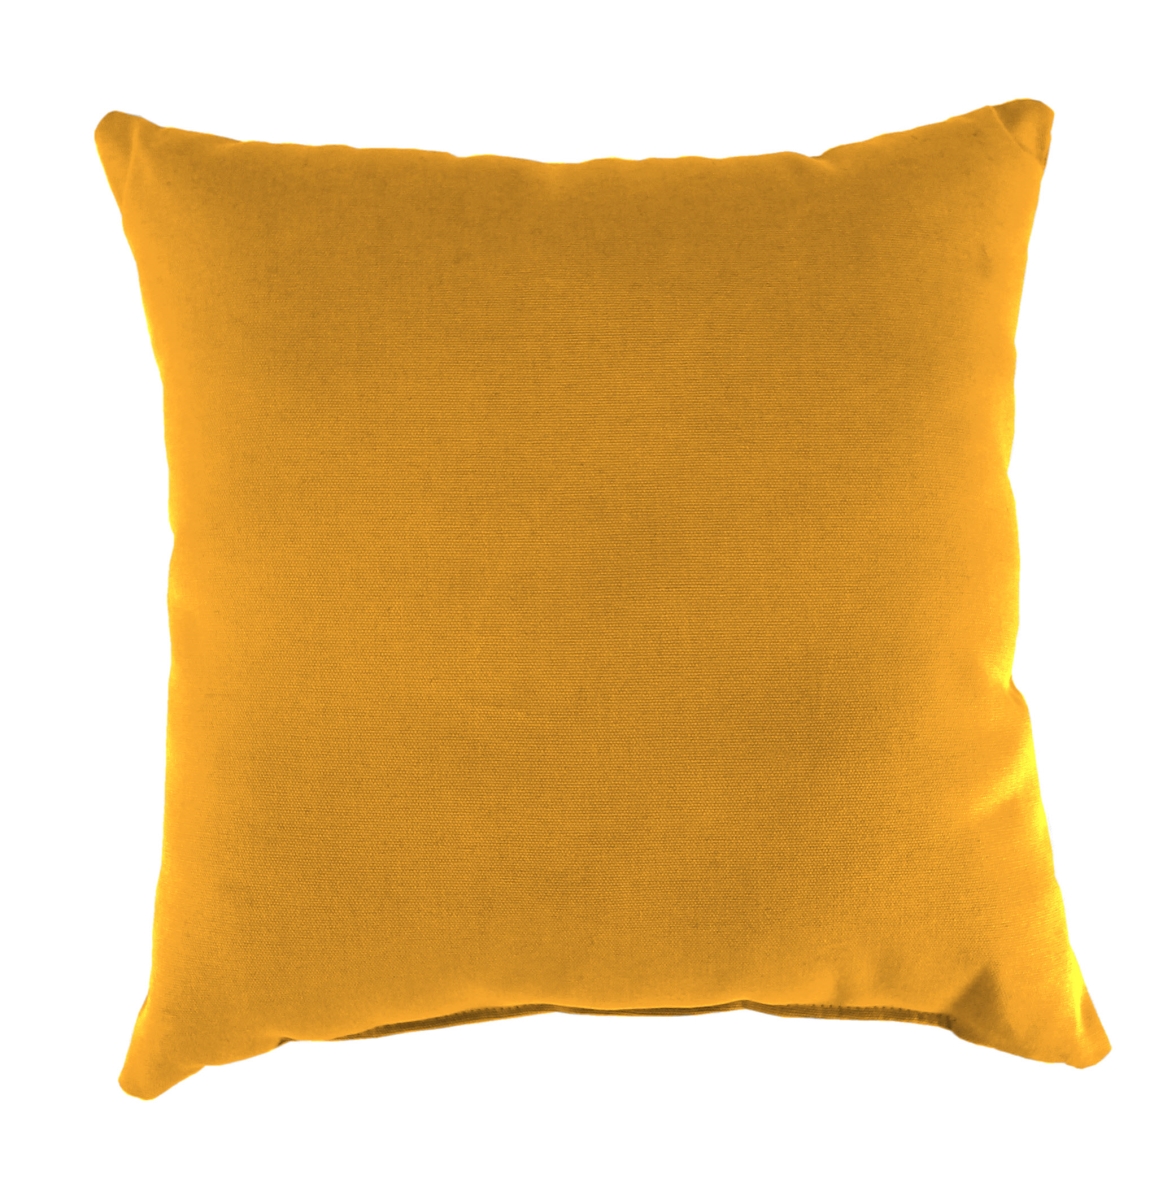 9950pk1-4242e 18 X 18 In. Outdoor Pillow In Solid Yellow